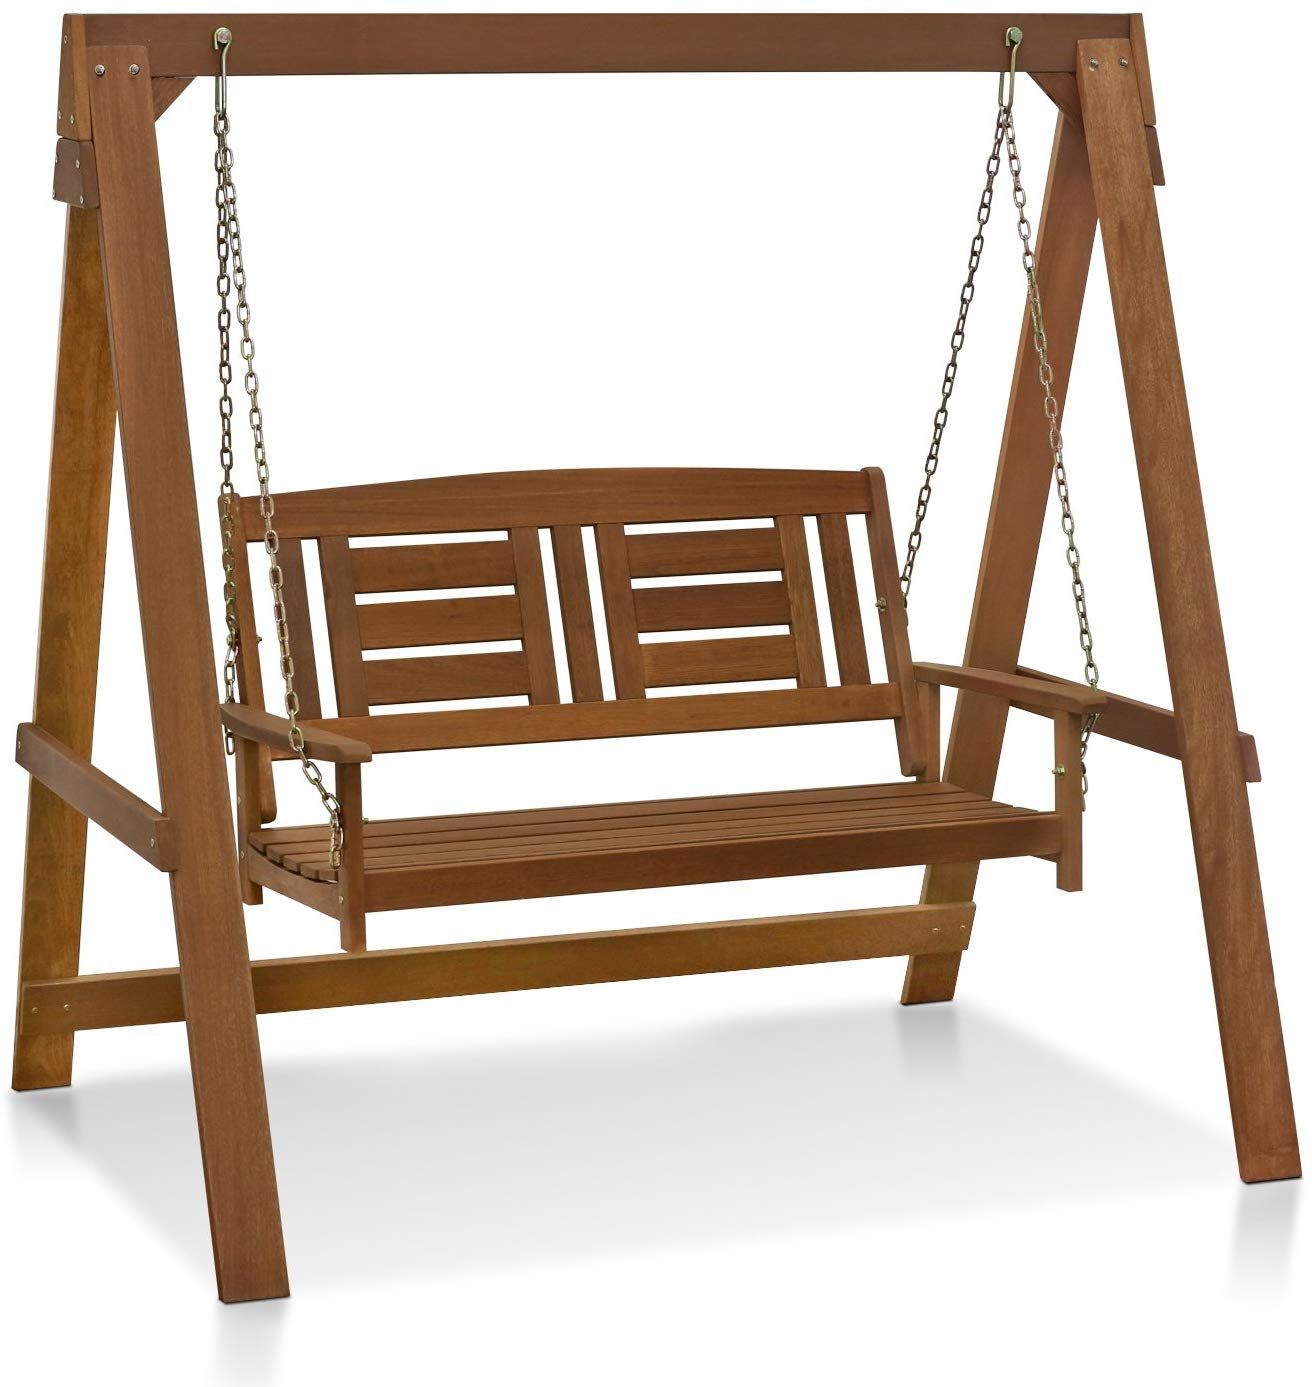 Patio Porch Swings With Stand Throughout Preferred Furinno Fg16409 Tioman Hardwood Patio Furniture Porch Swing With Stand In  Teak Oil, 2 Seater With Frame, Natural (View 22 of 30)